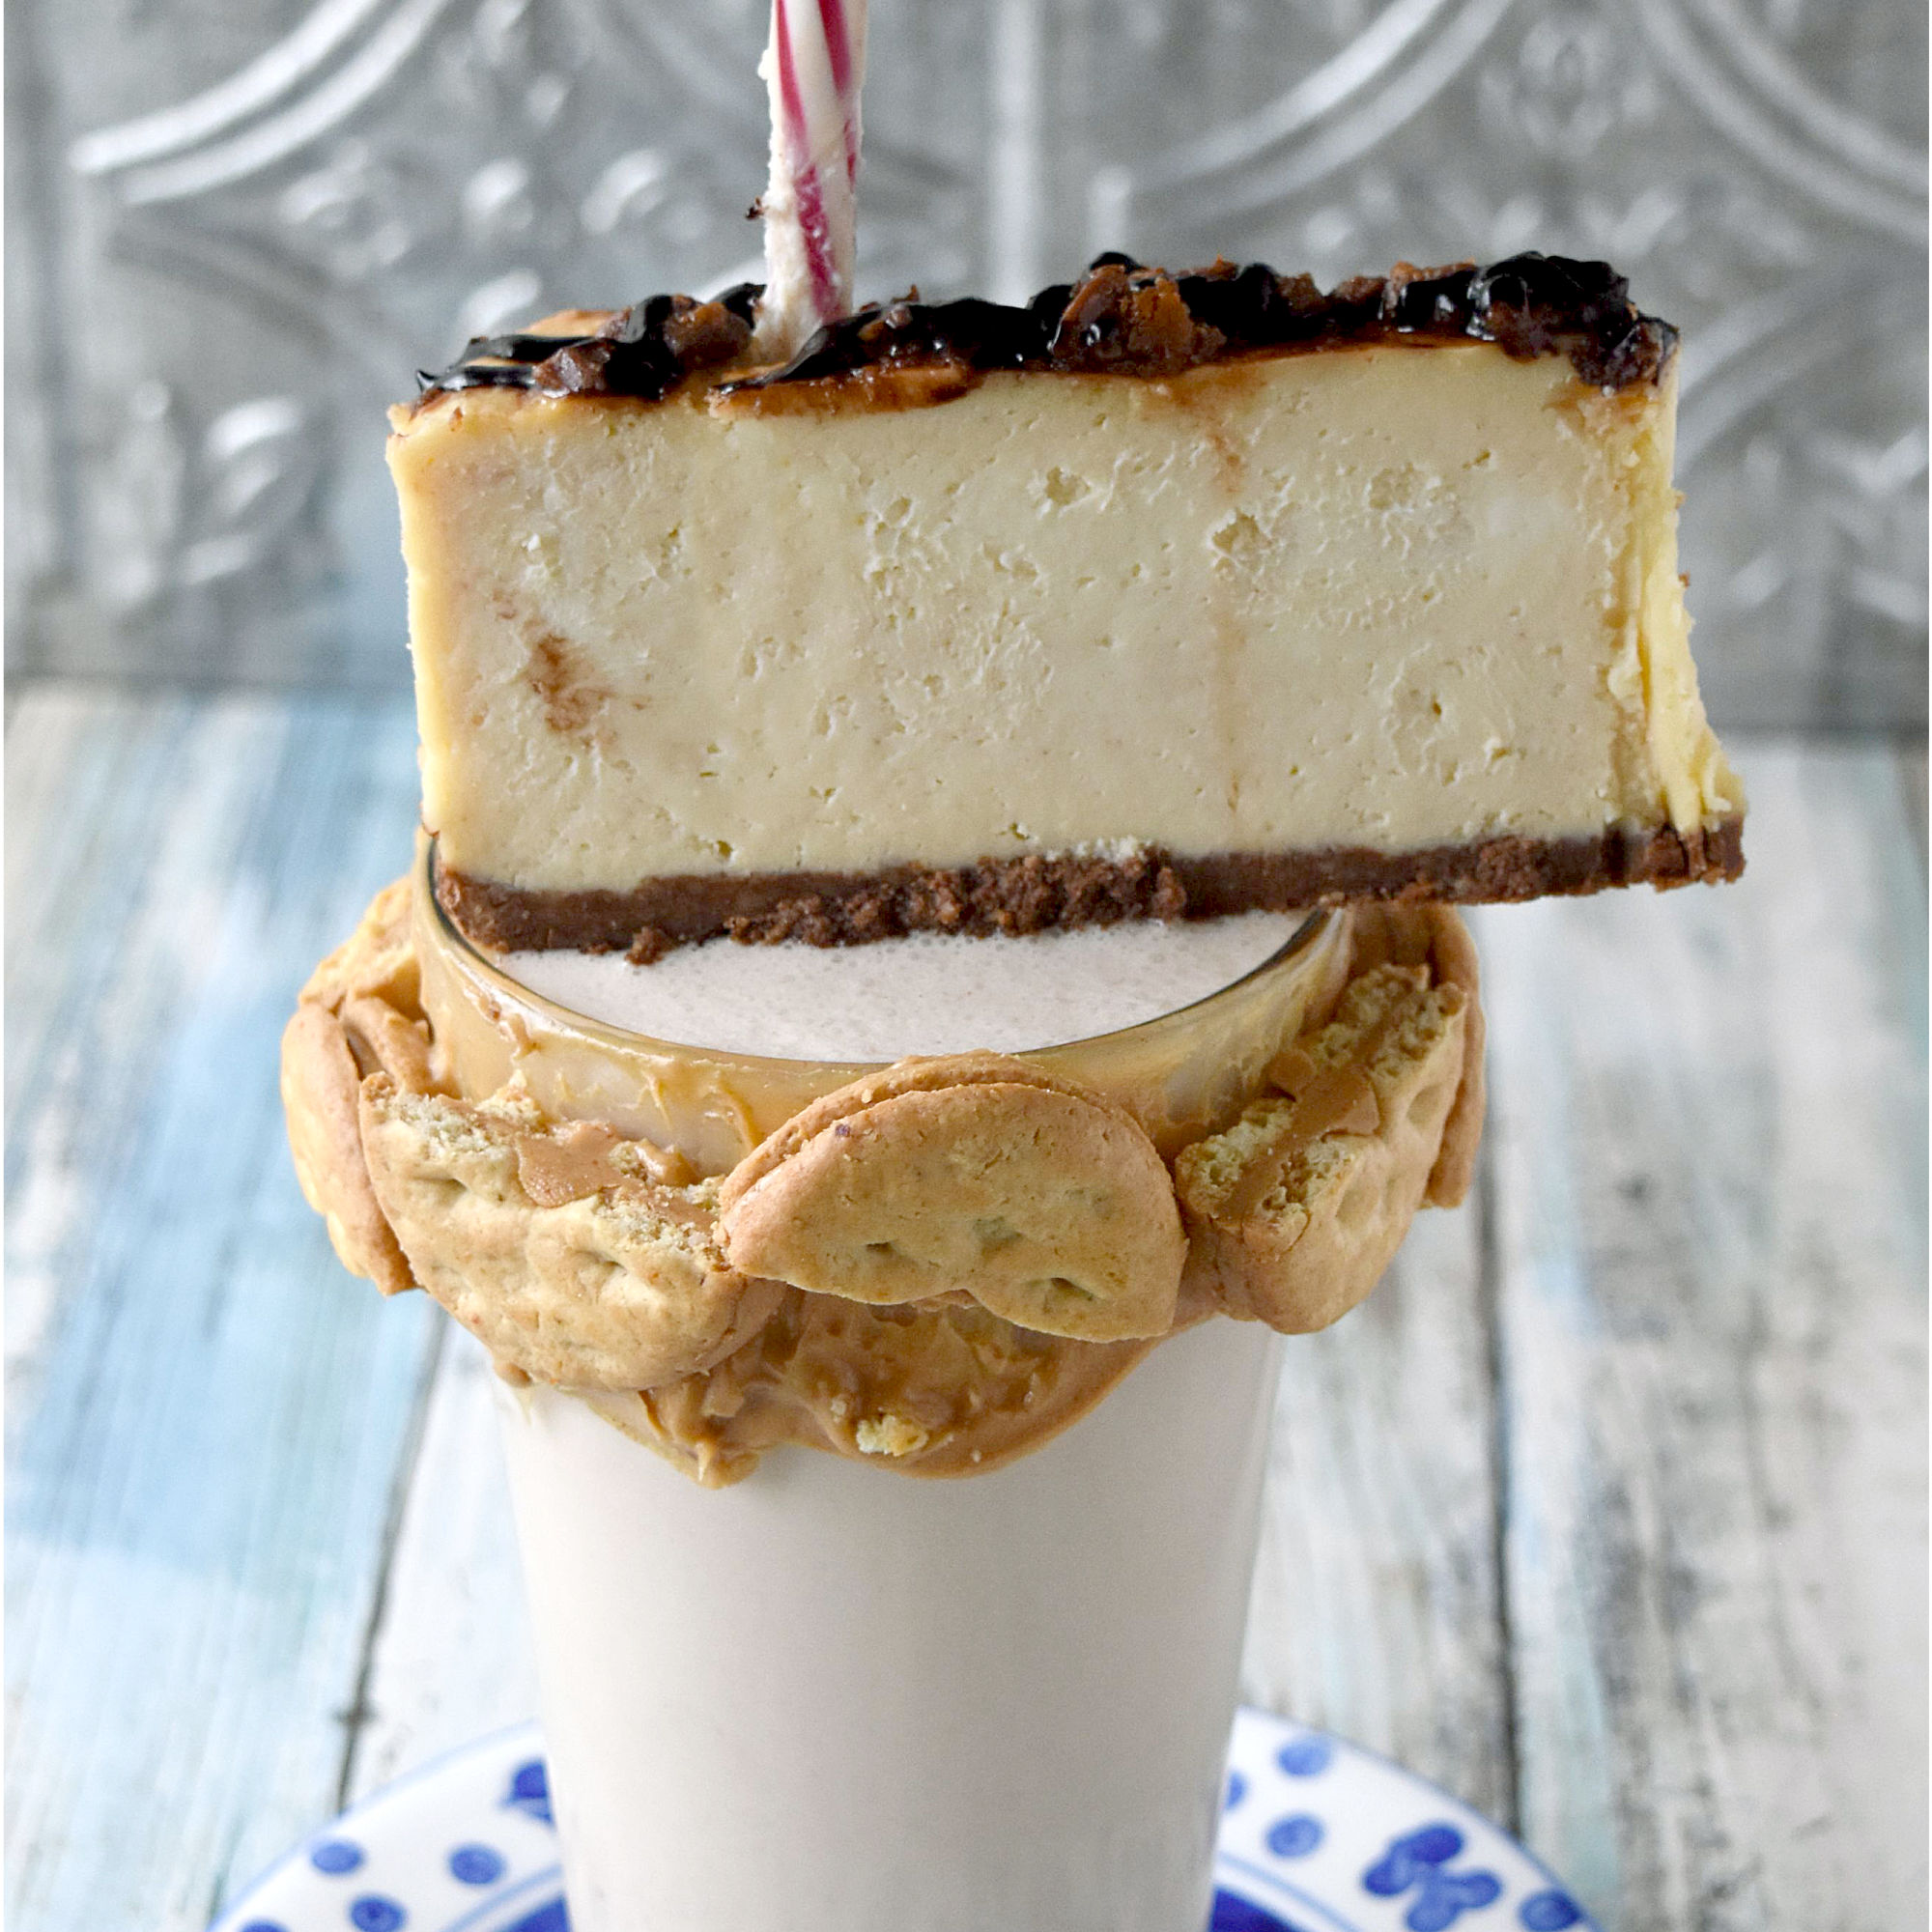 Peanut Butter Cheesecake Milkshakes tastes like a peanut butter cheesecake in a glass. It is sweet, full of peanut butter flavor with a hint of cheesecake tang. #OurFamilyTable